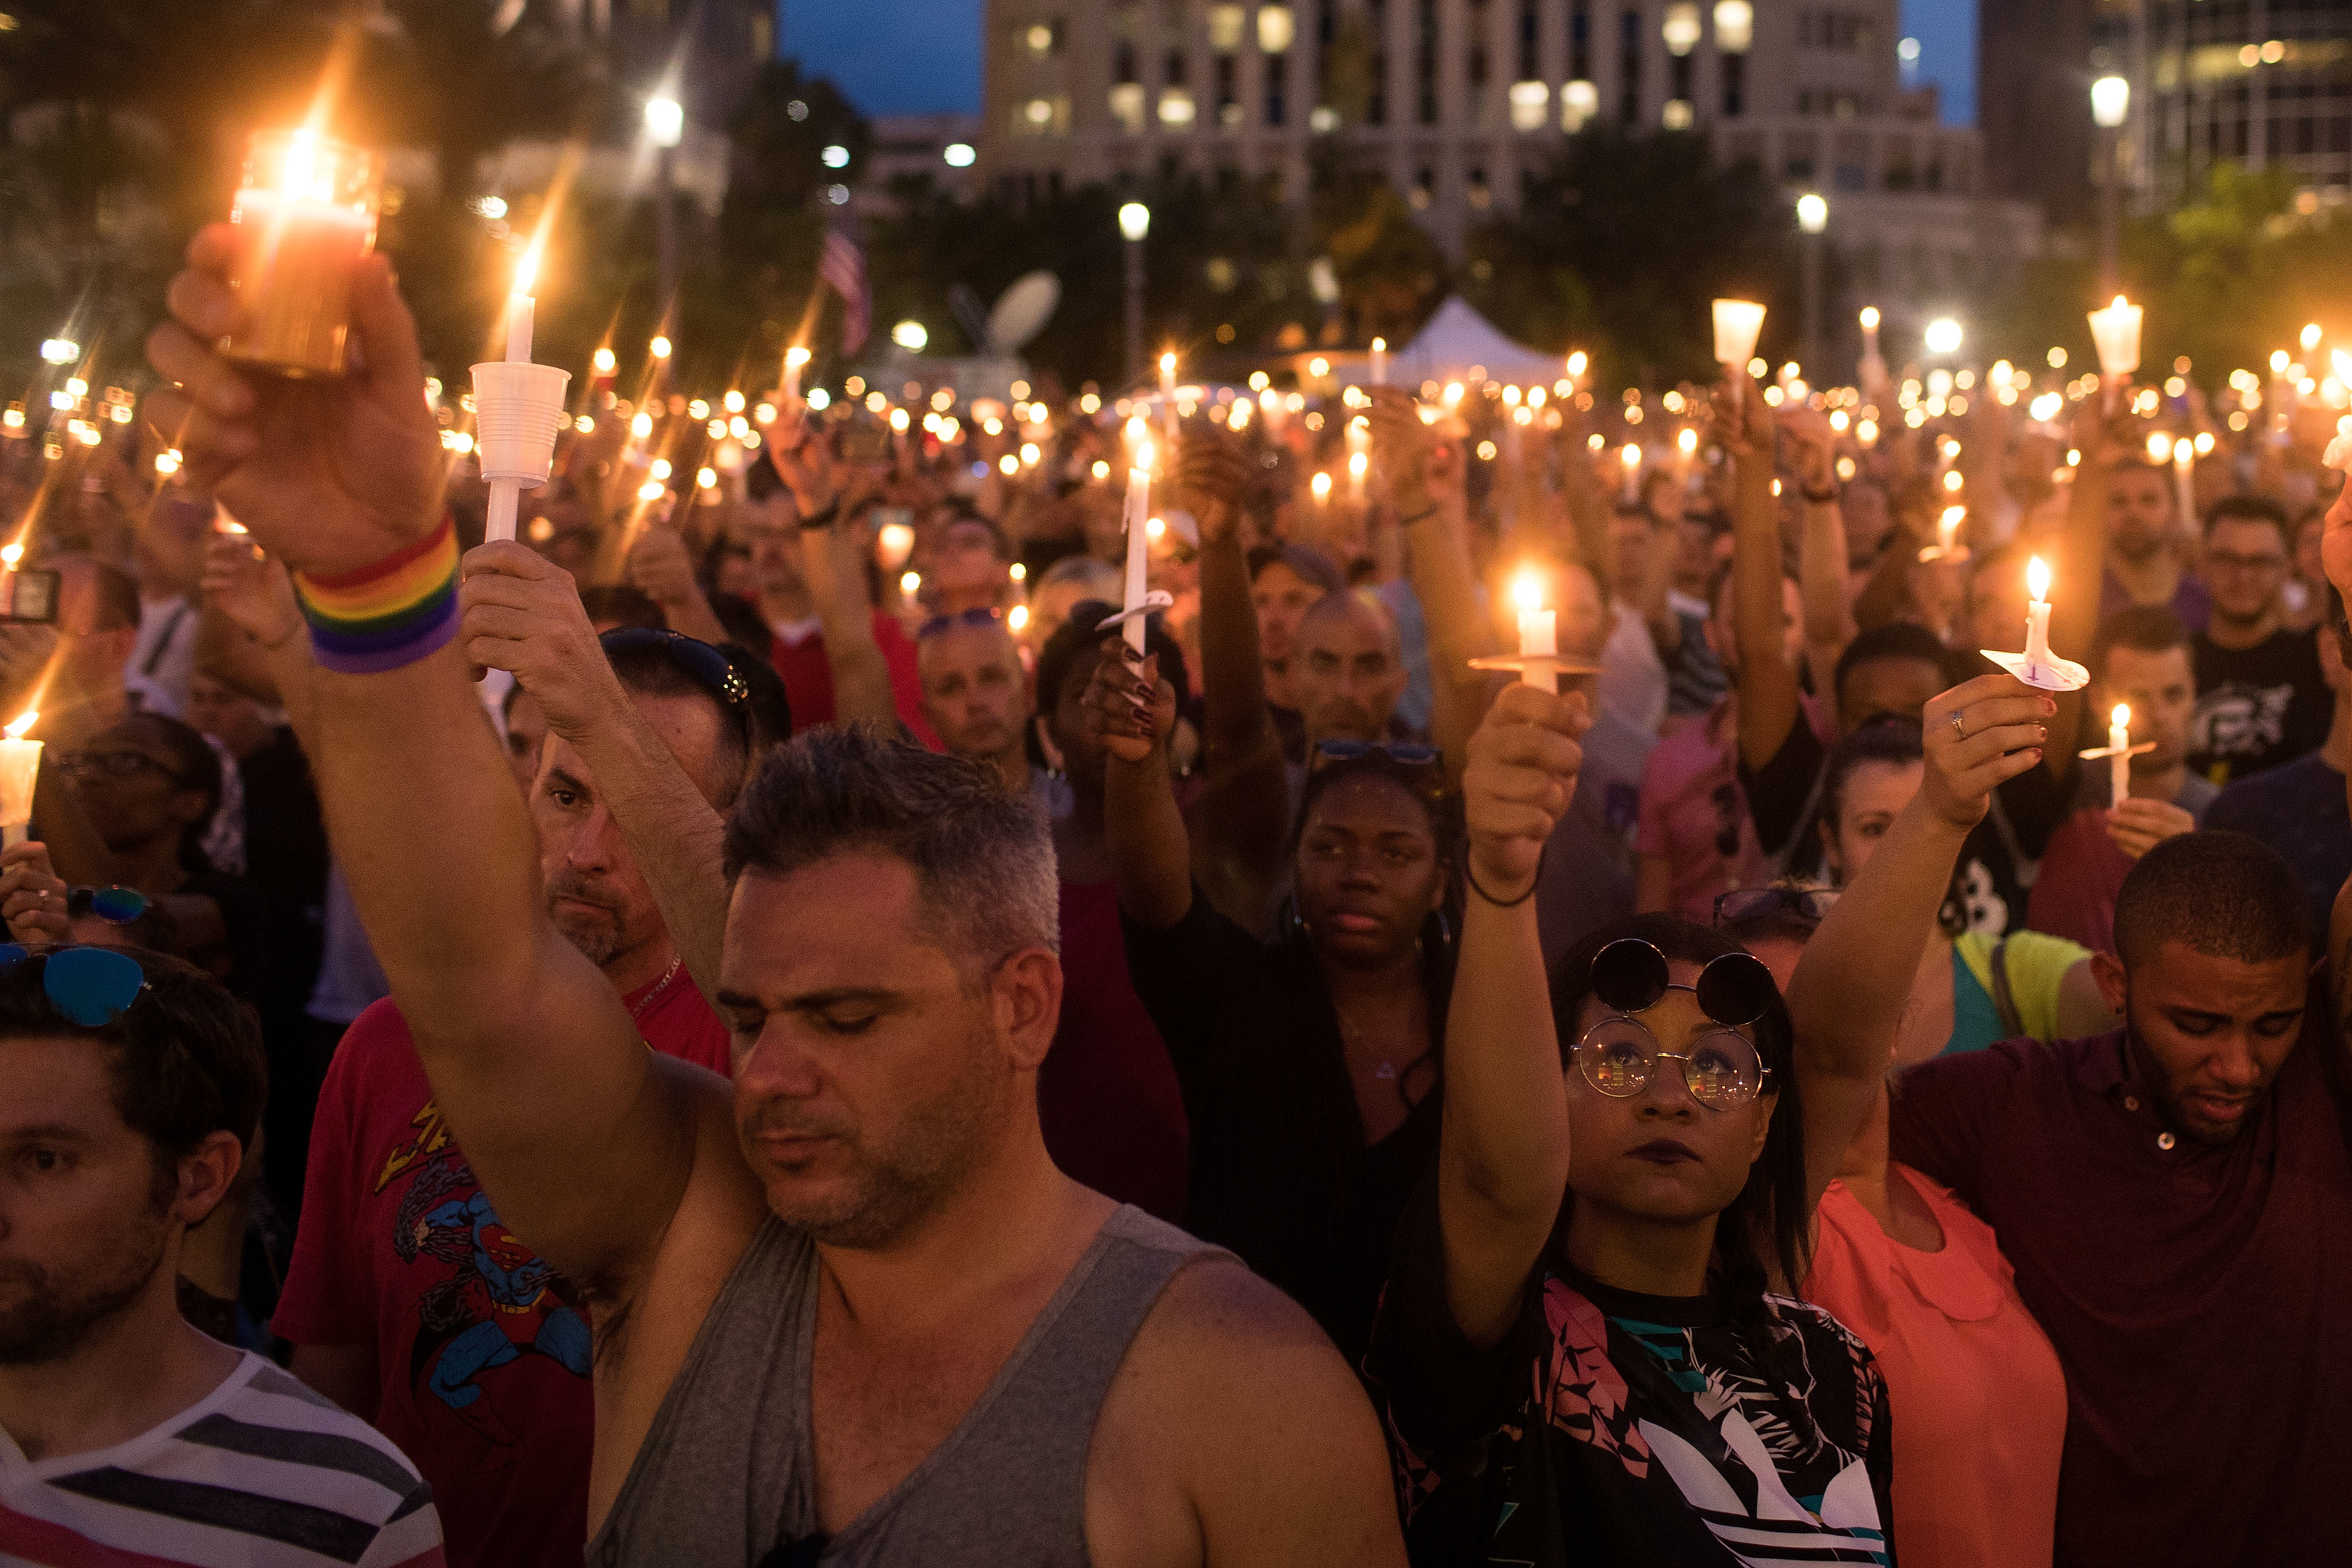 People hold candles during an evening memorial service for the victims of the Pulse Nightclub shootings, at the Dr. Phillips Center for the Performing Arts in Orlando, Florida (Drew Angerer/Getty Images)